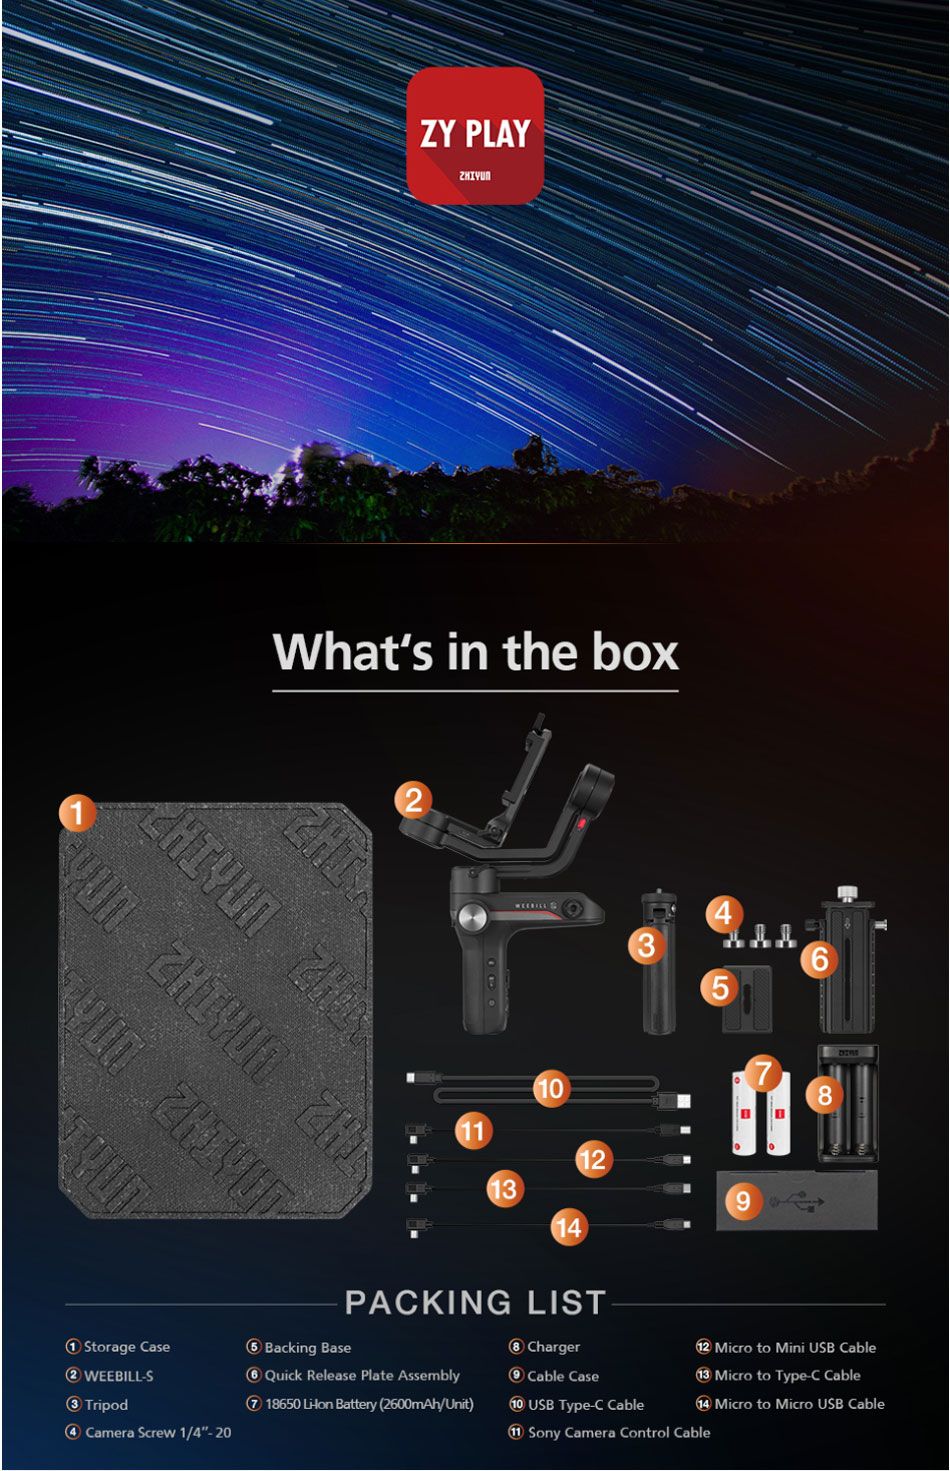 Zhiyun-Weebill-S-3-Axis-Image-Transmission-Handheld-Gimbal-Stabilizer-for-Mirrorless-Camera-1594762